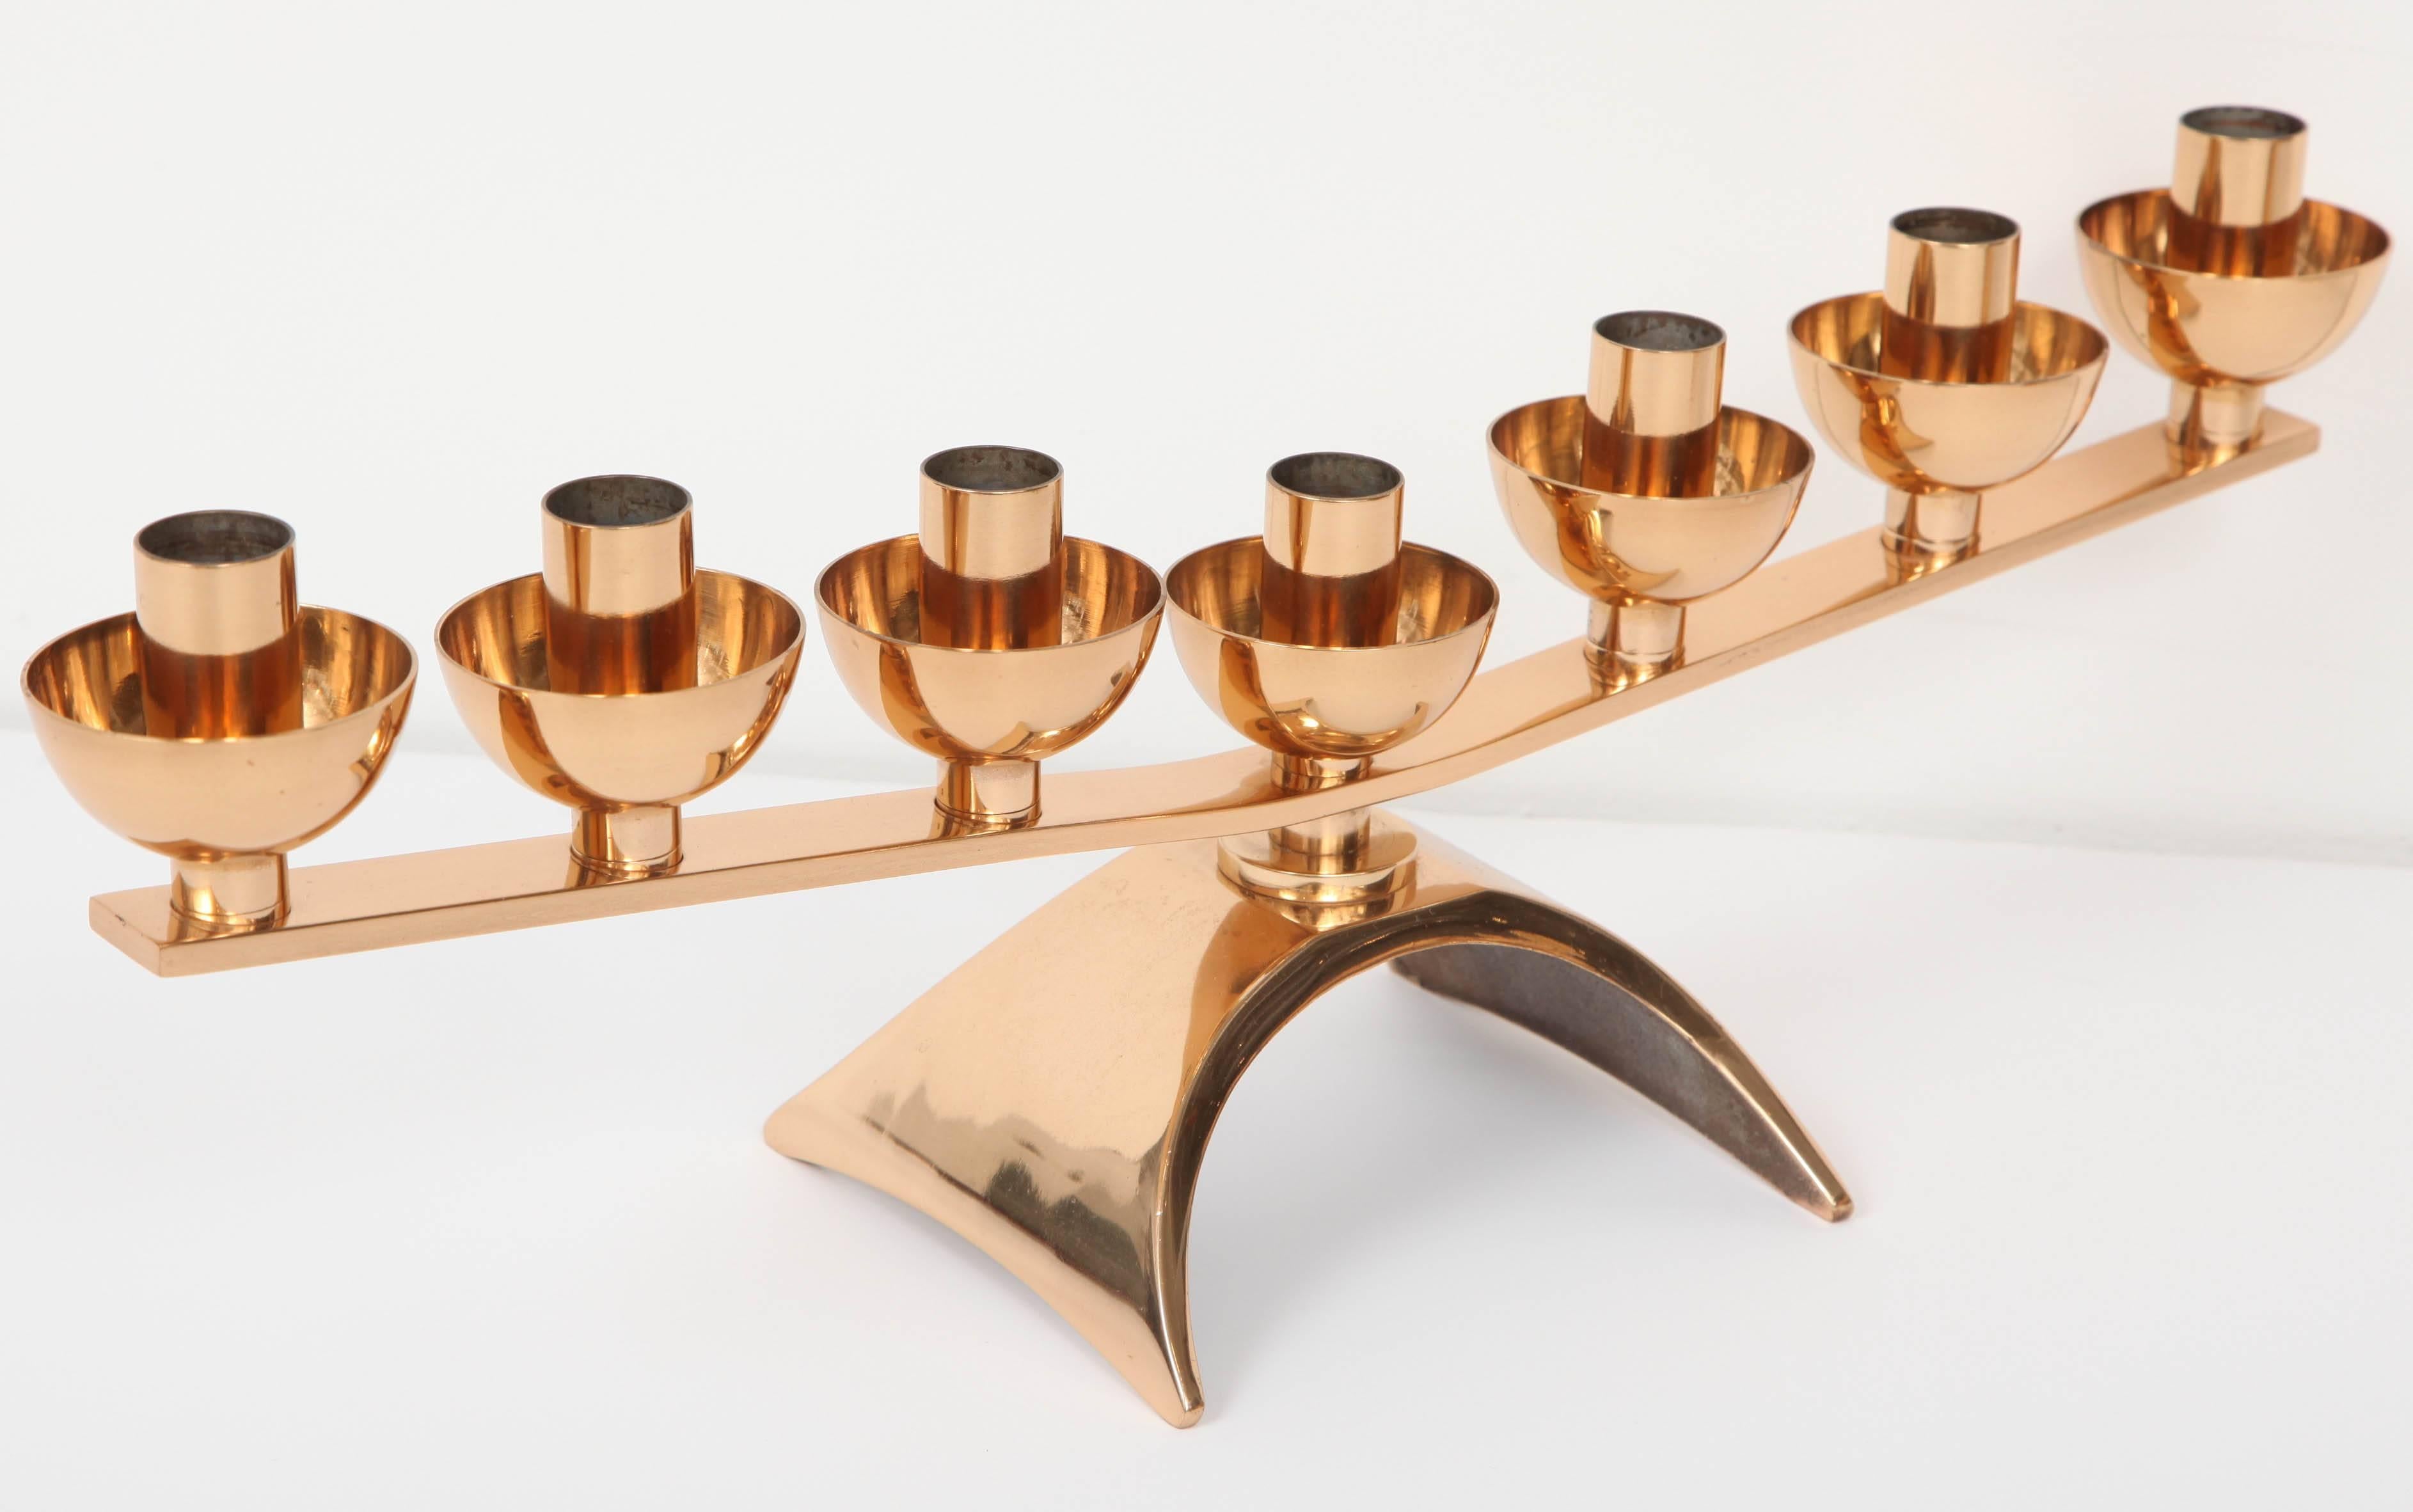 Pair of Brass Mid-Century Modern Candleholders, circa 1960 For Sale 3